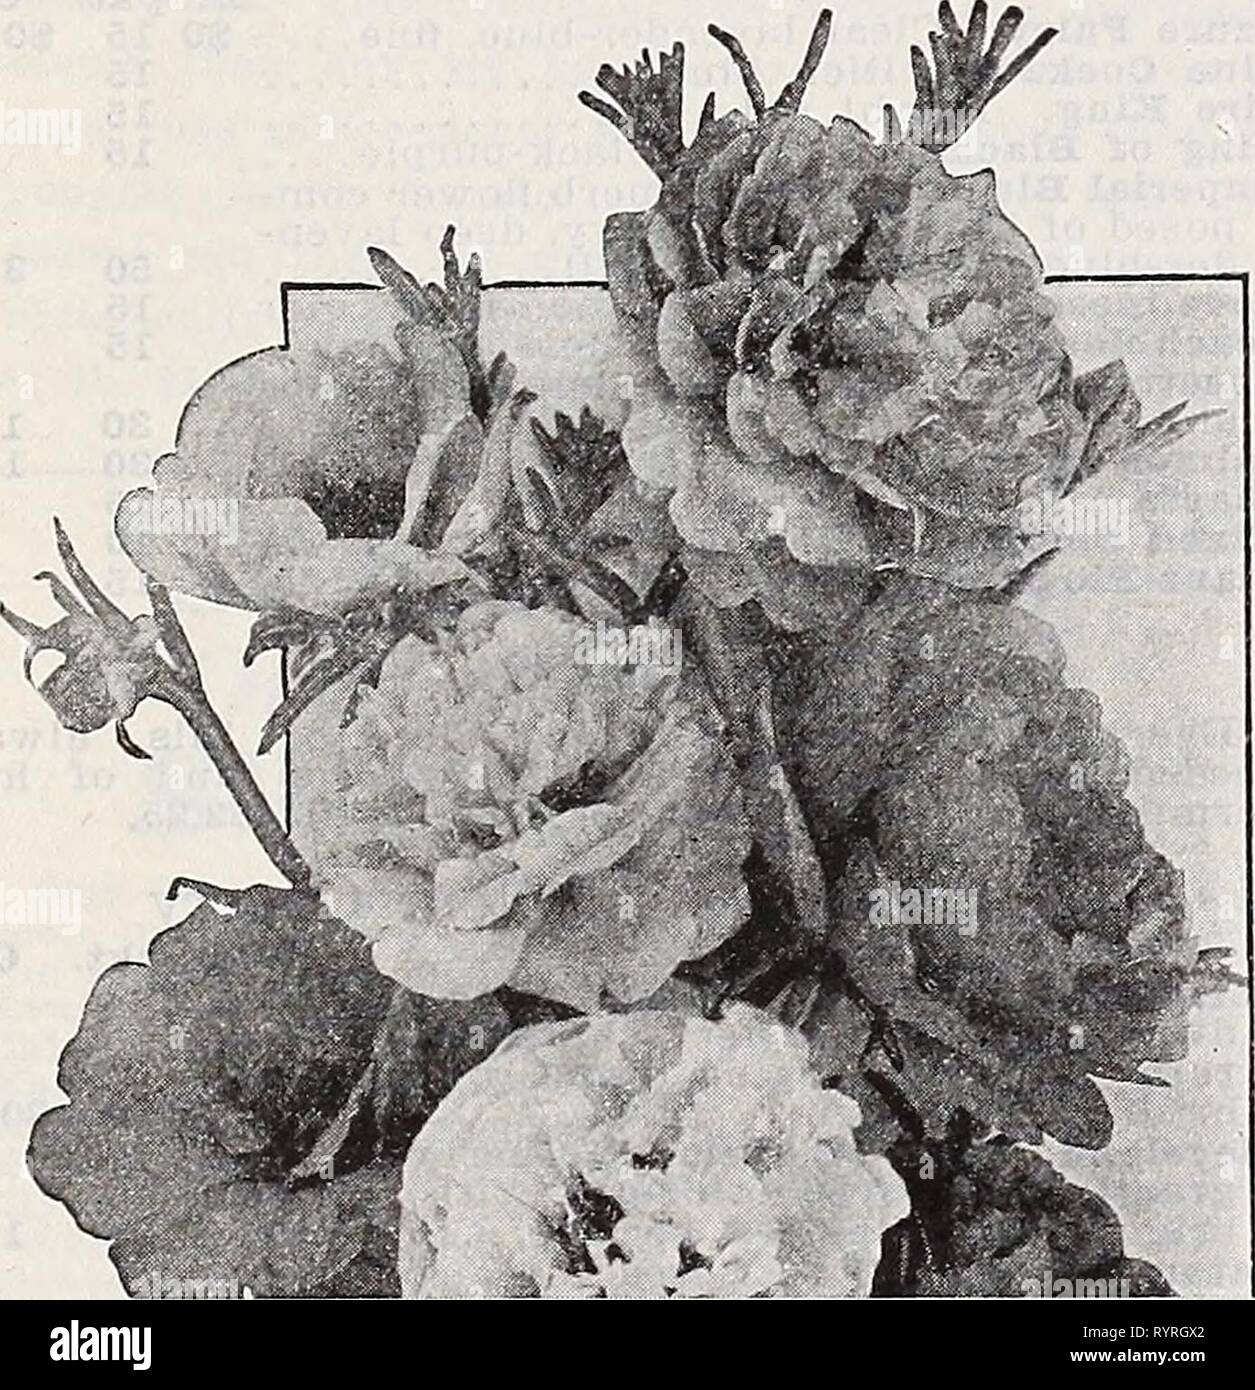 Dreer's wholesale catalog for florists Dreer's wholesale catalog for florists and market gardeners : 1939 winter spring summer . dreerswholesalec1939henr Year: 1939  • HENRY A. DREER Annual Flower Seeds WHOLESALE CATALOG Single Annual Shirley Poppies Tr. pkt. American Legion, The Improved English Scarlet or Flanders Poppy. Color bril- liant orange-scarlet $0 10 Apricot. Rich deep apricot 15 Blue Shades. Various shades of blue... 10 Salmon Pink. An exquisite shade 10 'White. Satiny pure white petals 10 Wild Rose Pink. An exquisite rich pink. . 15 Shirley, Mixed. Finest mixed colors. %%%%%%%% lb Stock Photo